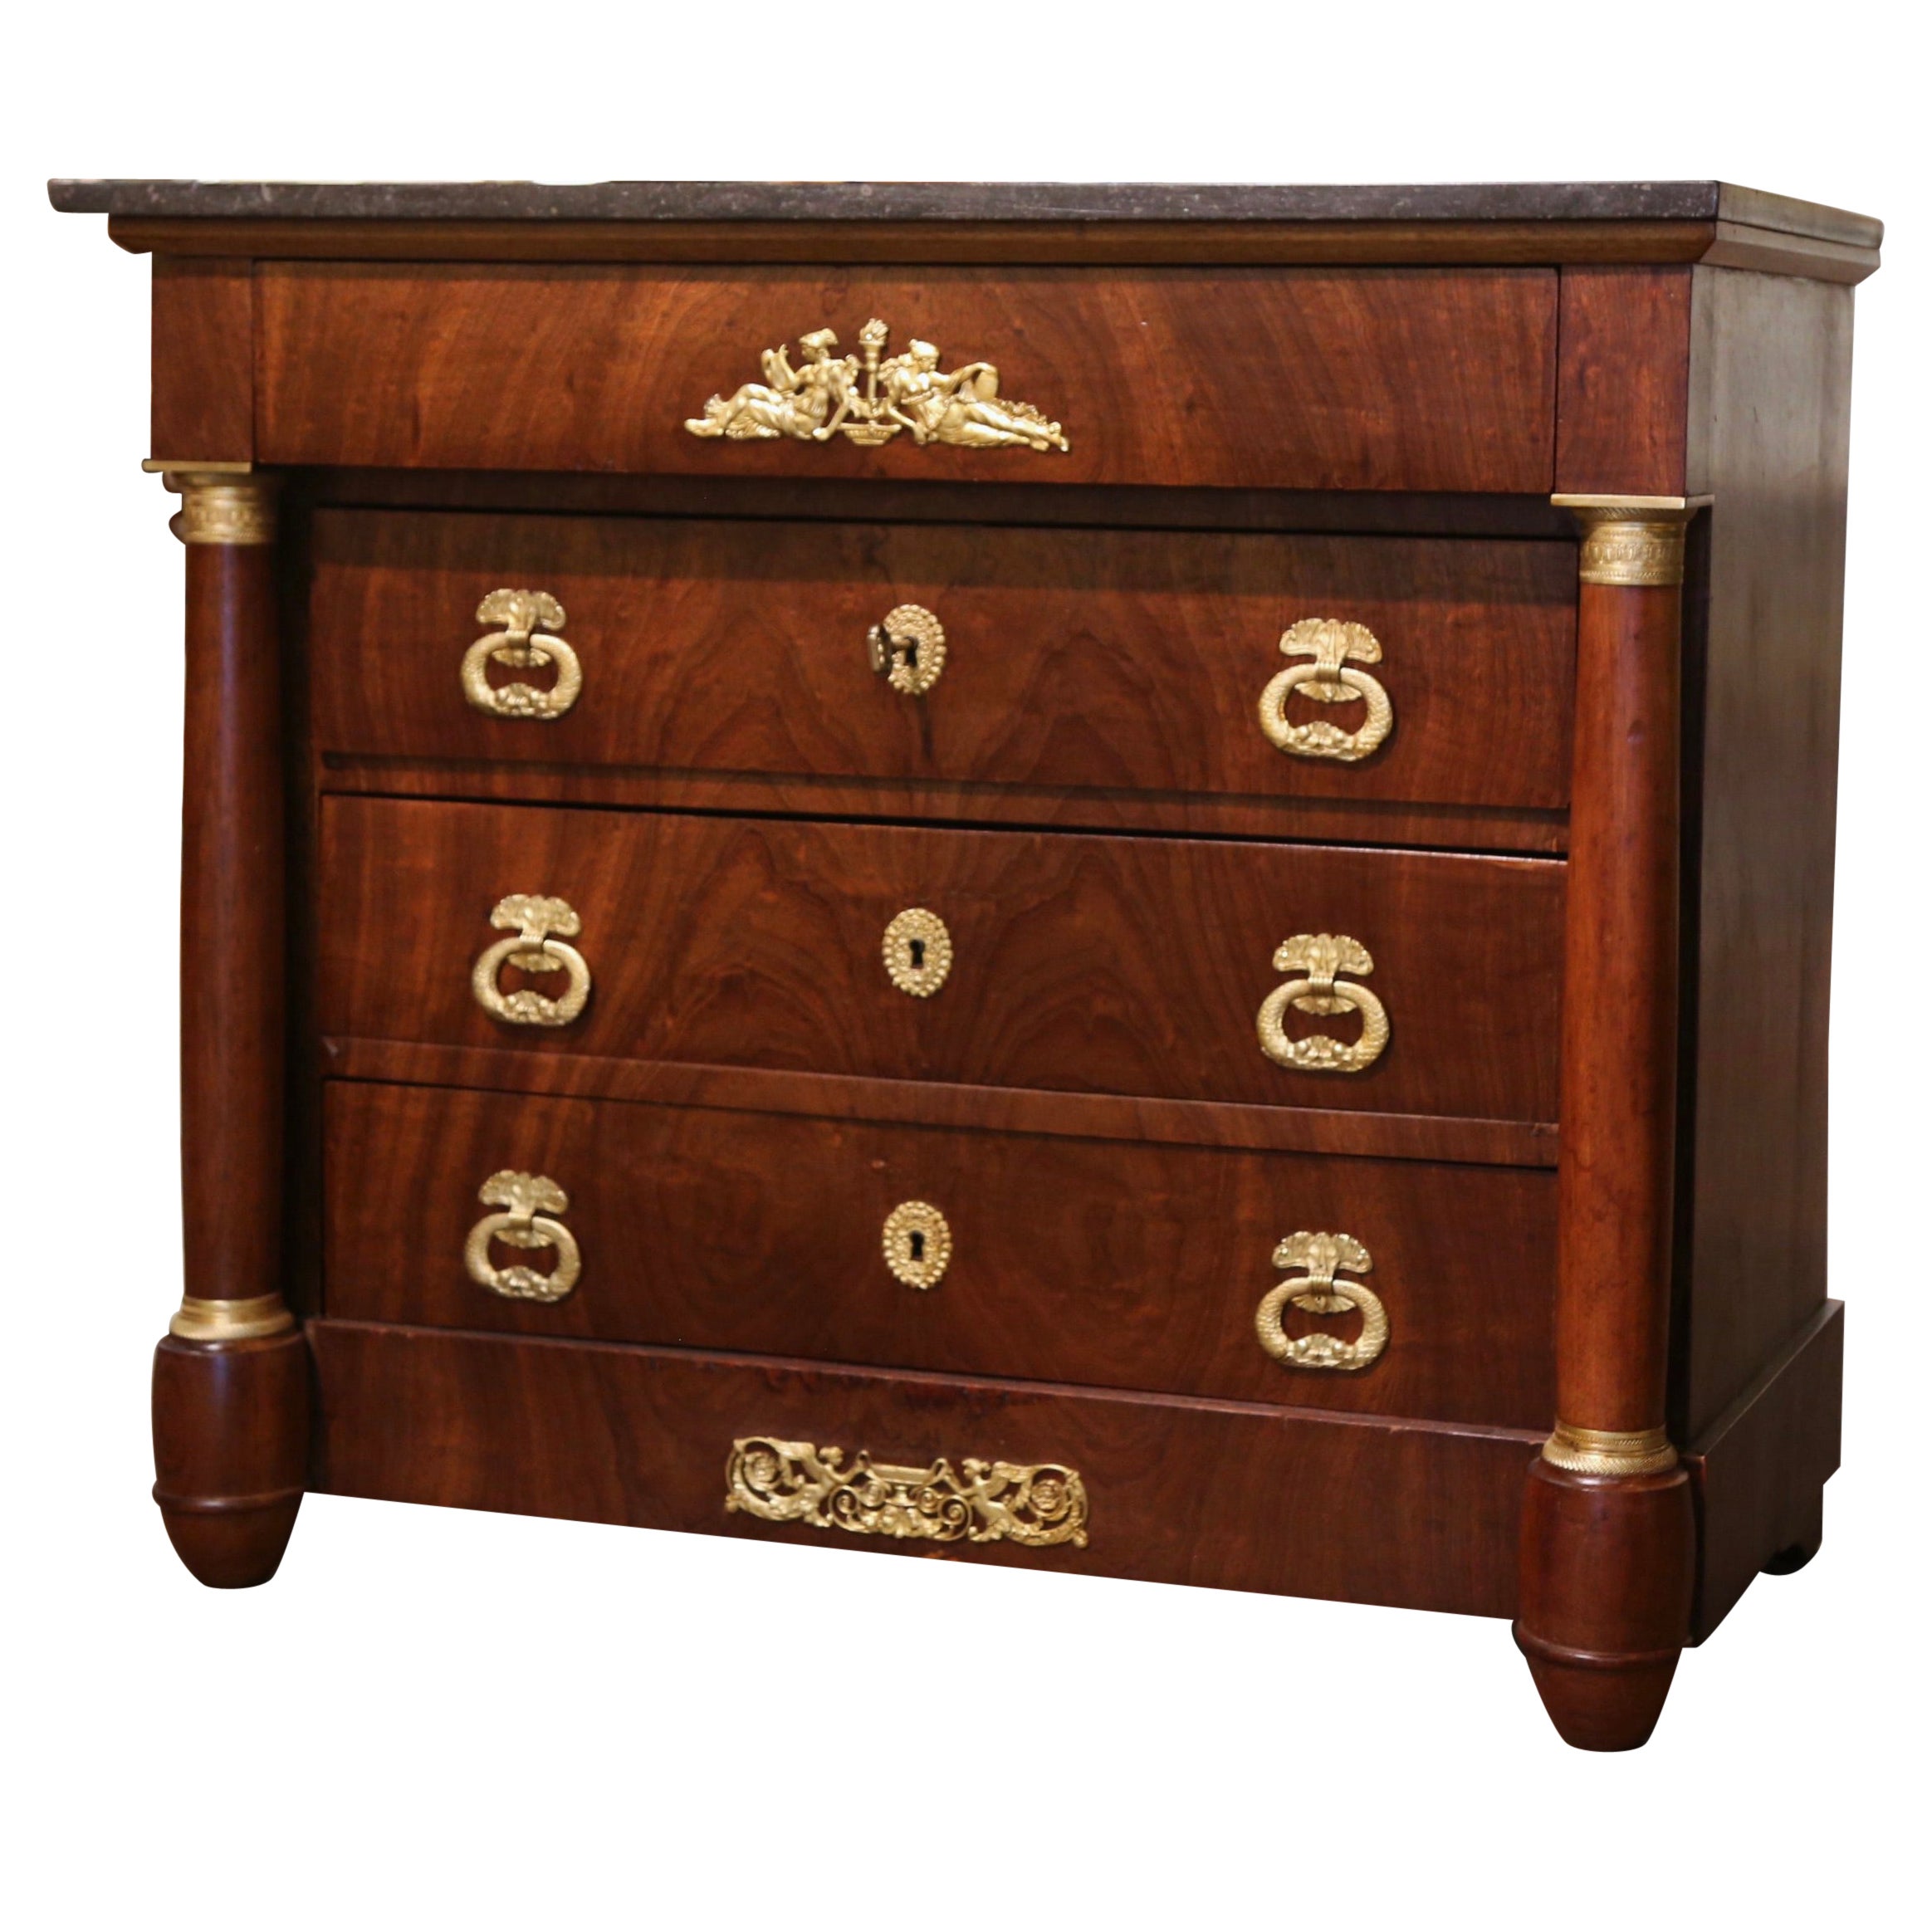 19th Century French Empire Marble Top Carved Chestnut & Ormolu Chest of Drawers For Sale